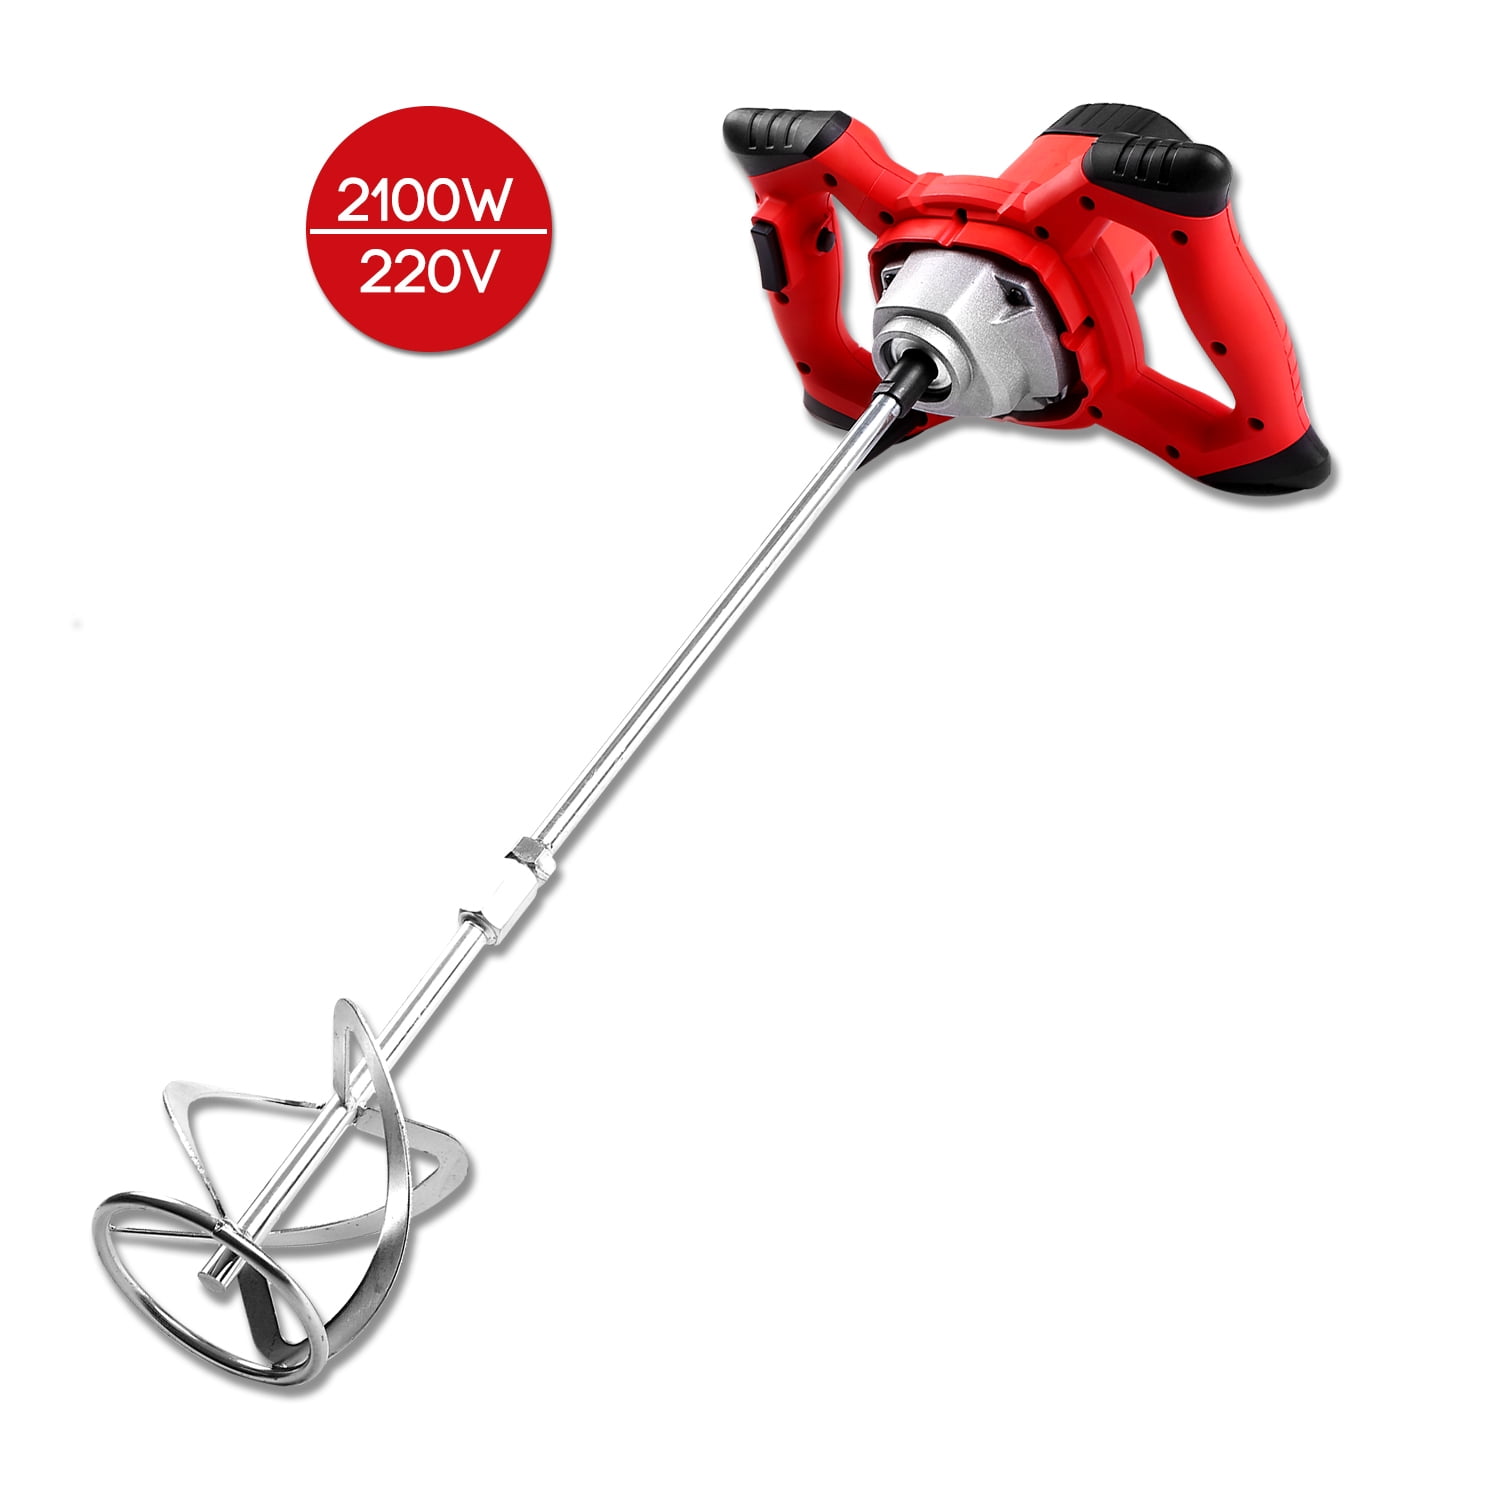 HEAVY DUTY 6 Speeds 1500W CEMENT PLASTER MORTAR PAINT MIXER MIXING PADDLE 220V 